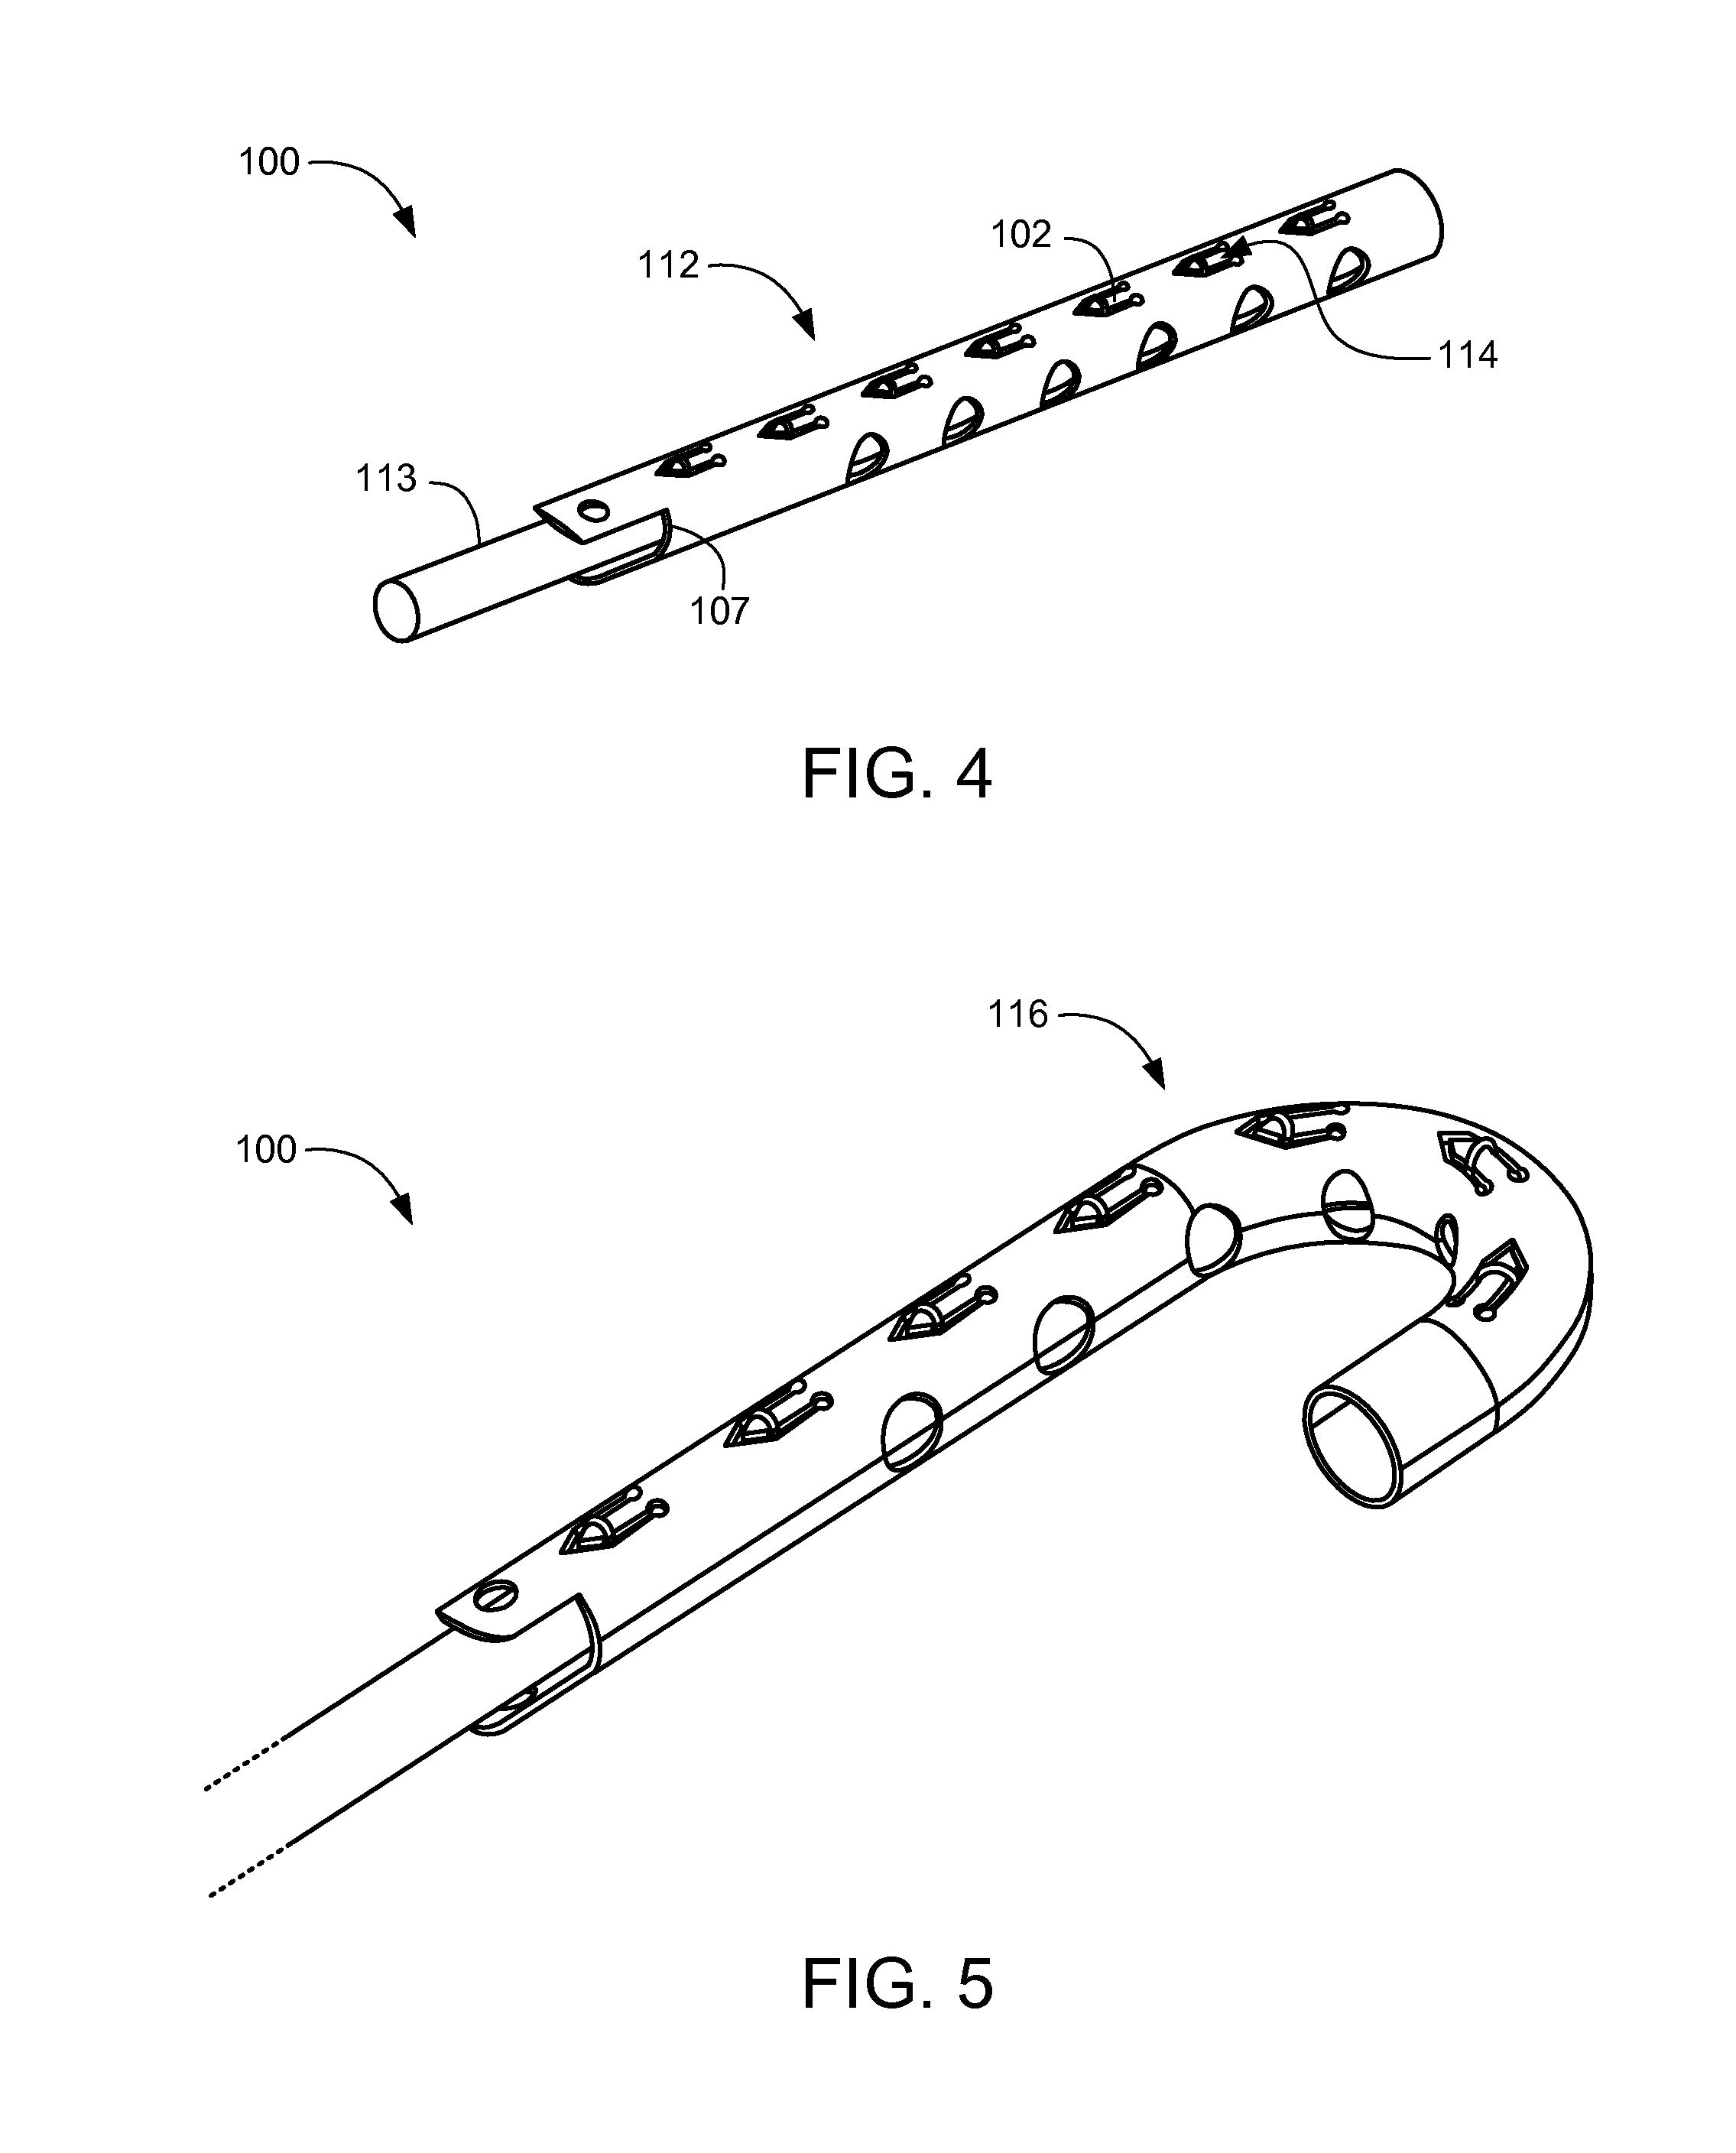 Memory material implant system and methods of use